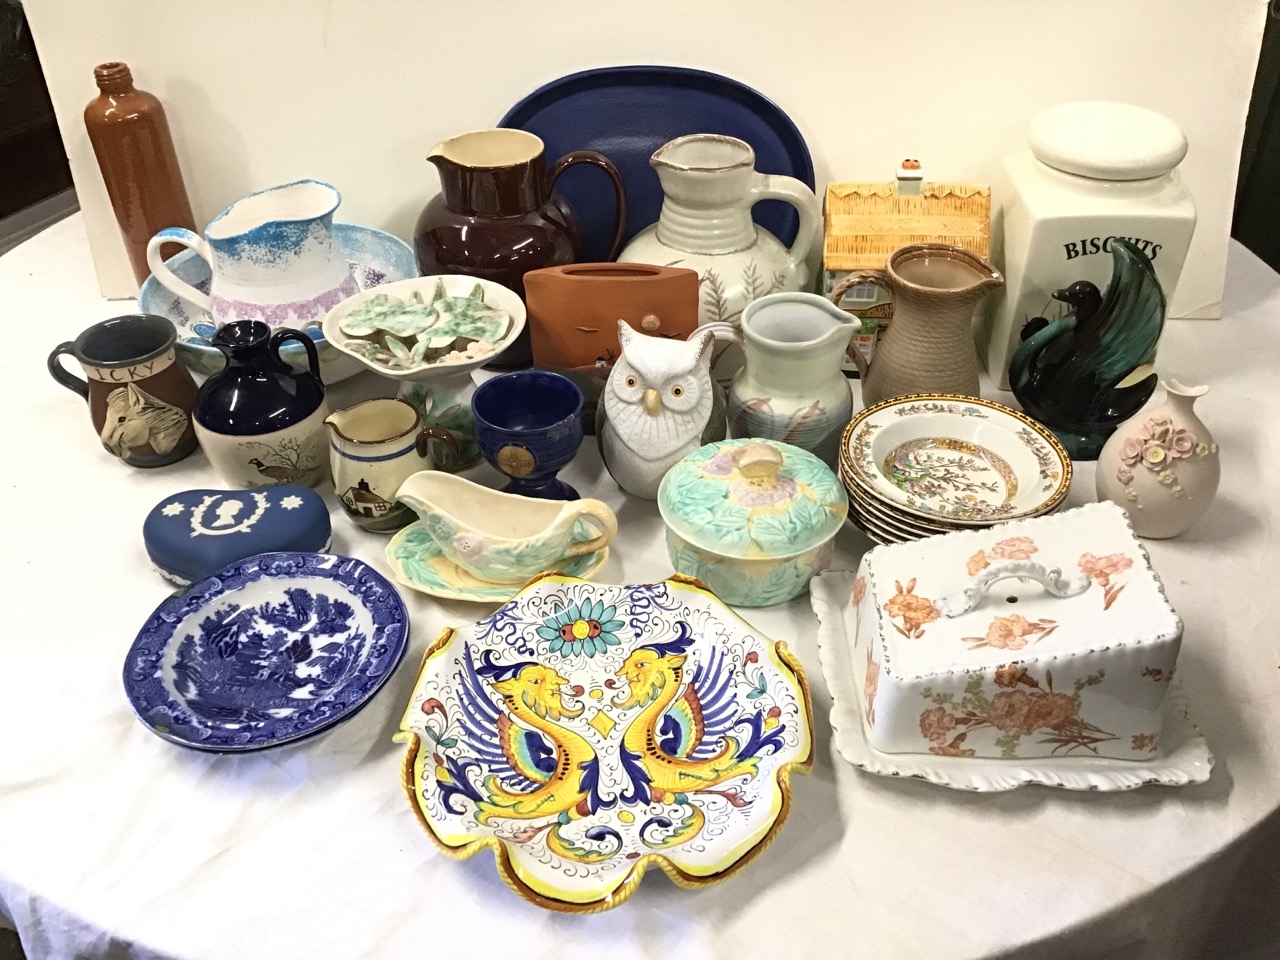 Miscellaneous ceramics - a West German stoneware jug, a pair of Maling bowls, motto ware, a chalice,